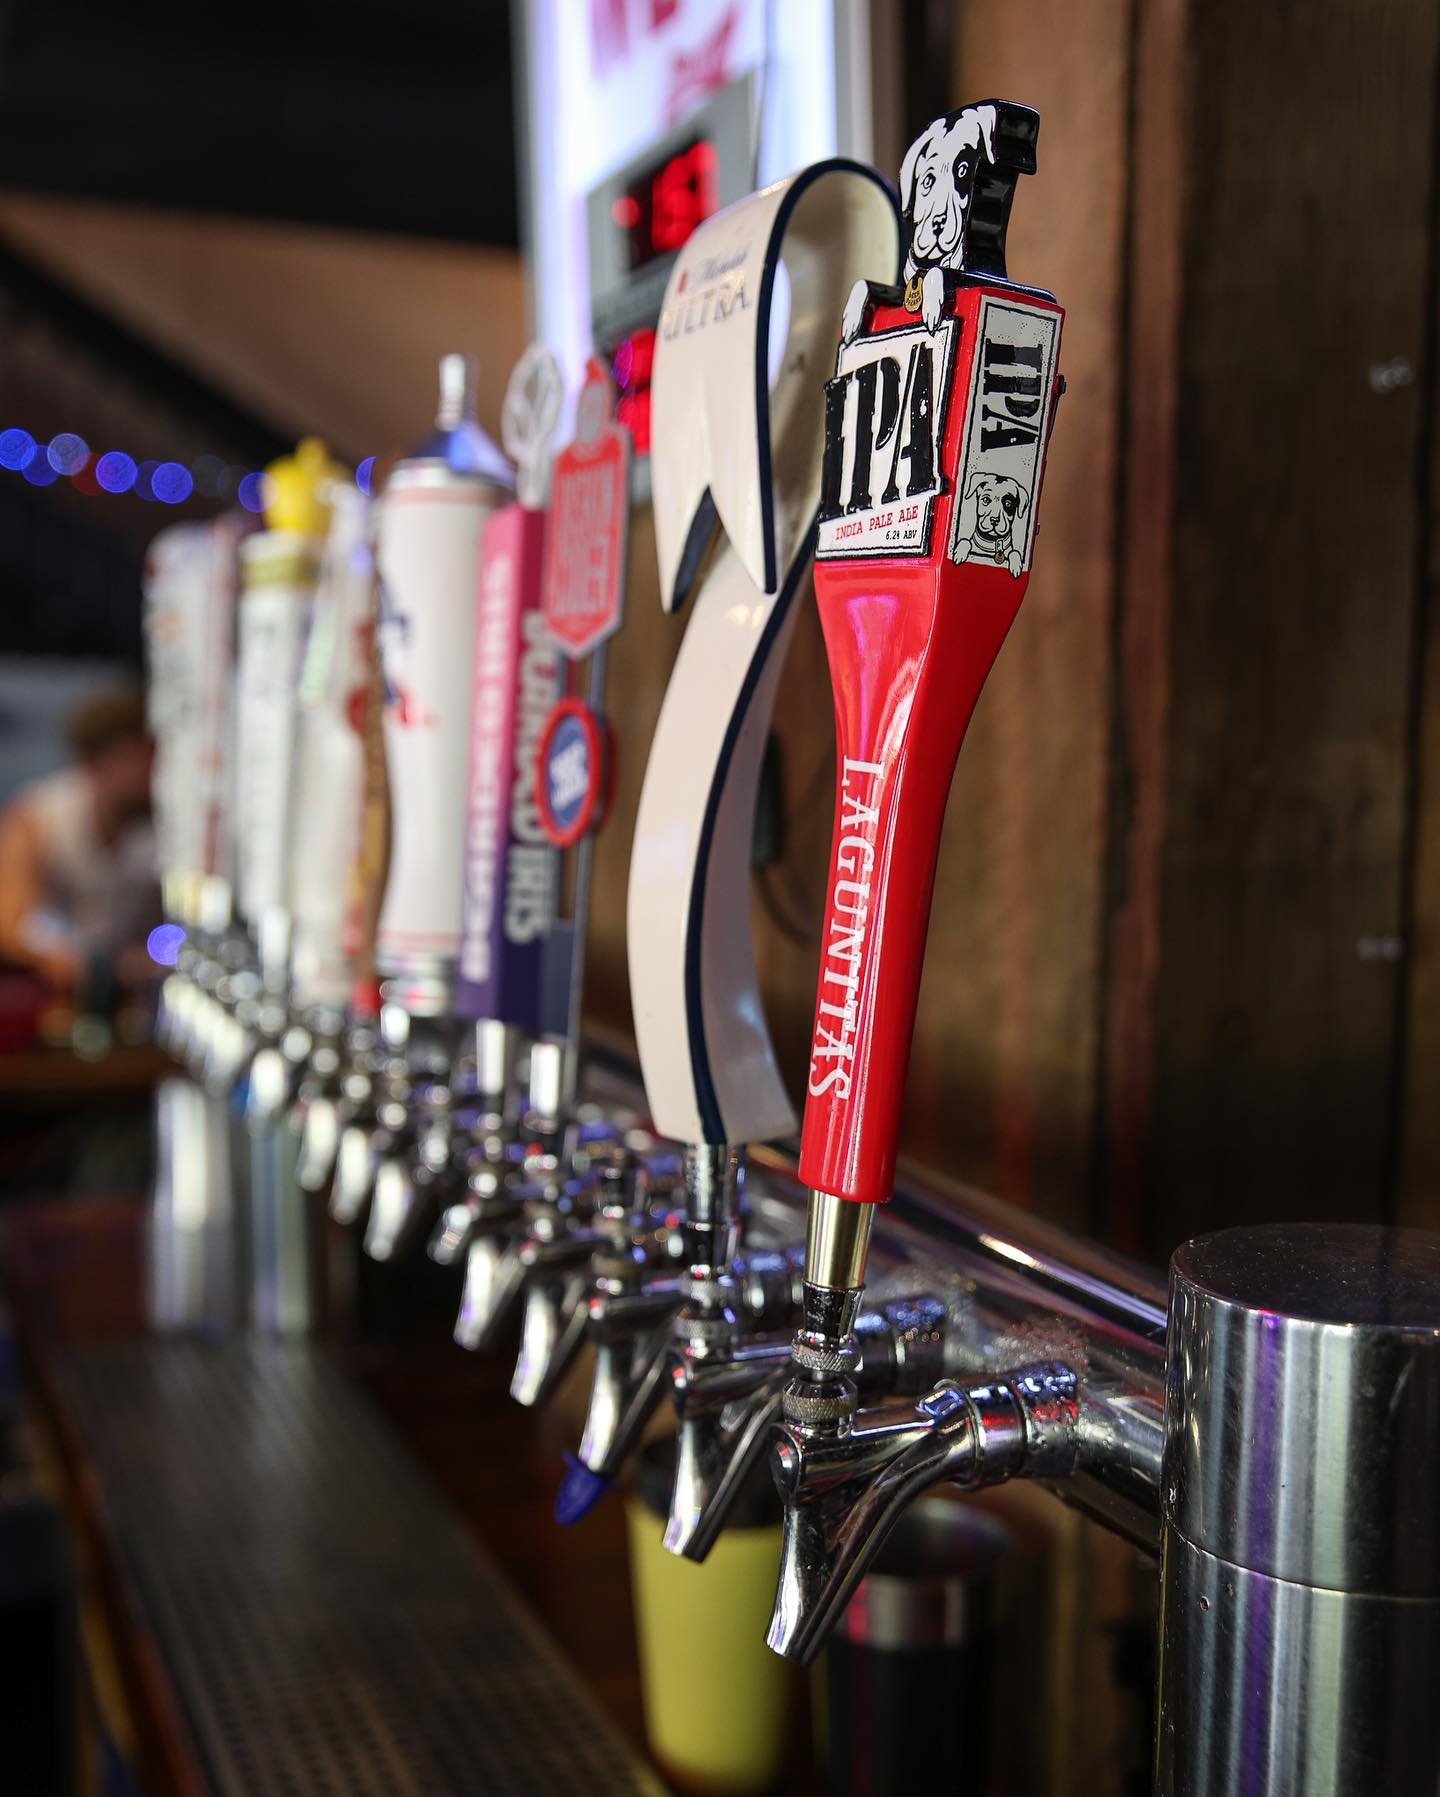 Keep your glass full never miss a play with our selection of draft beer at DawgHouse. Cheers to great food, drinks, and unforgettable moments!